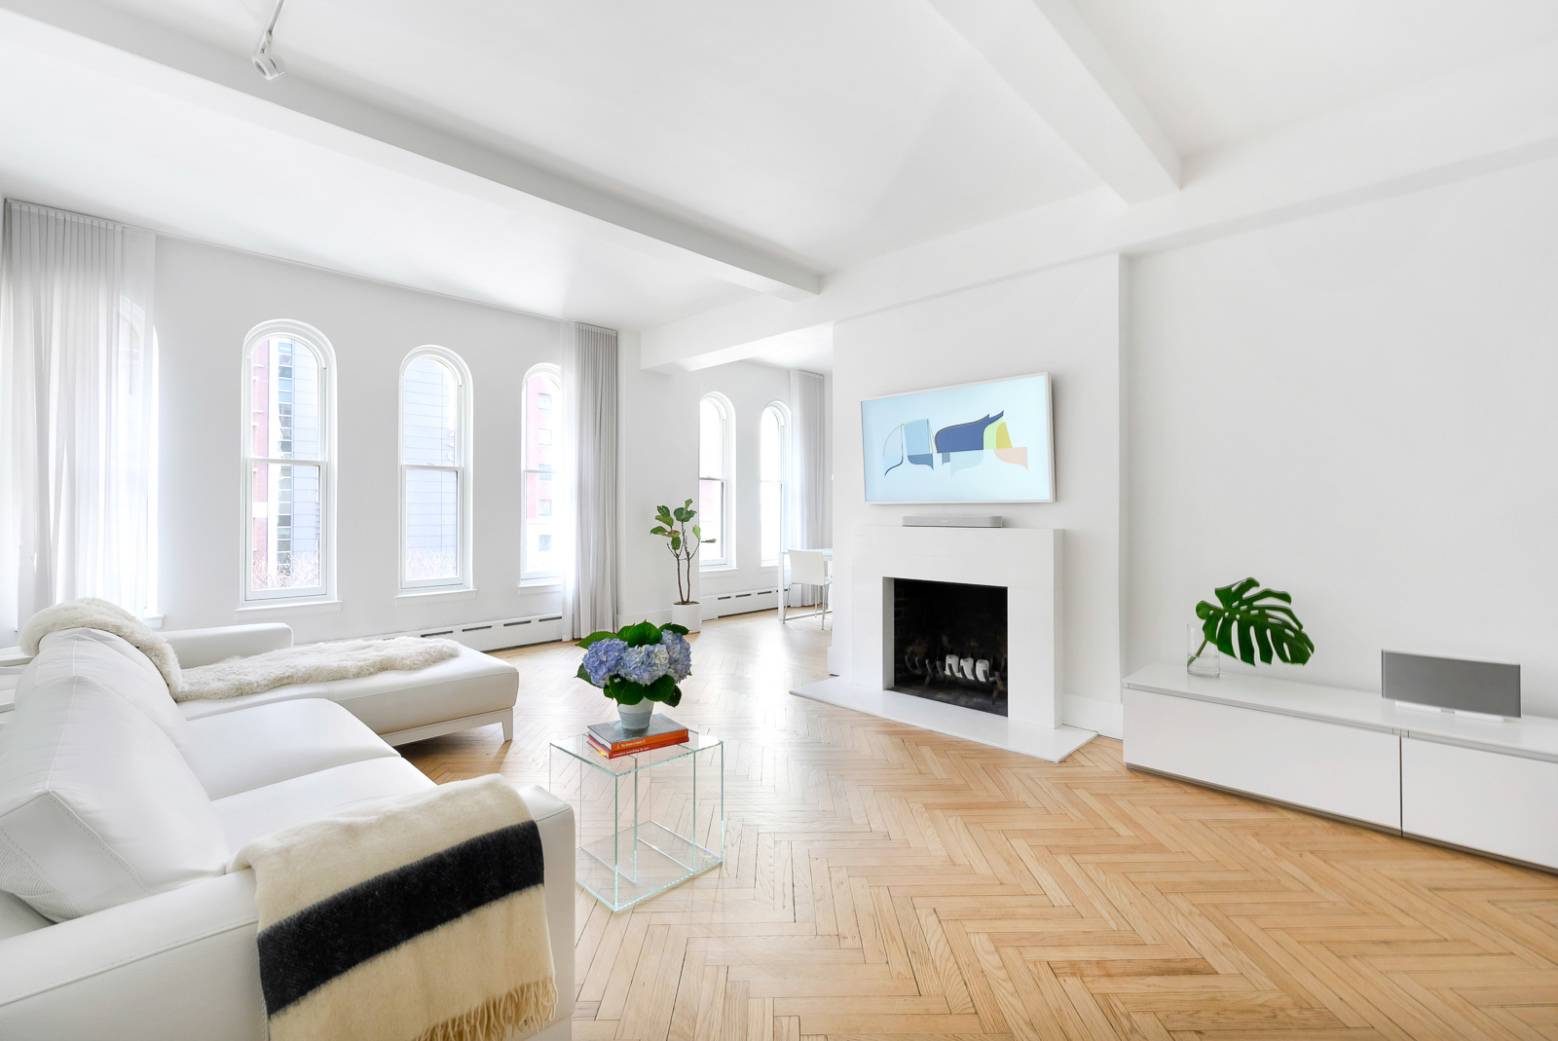 With an impressive 48 feet of Park Avenue frontage, exquisite pre war details and an iconic address, this gracious, renovated 2 bedroom, 1.